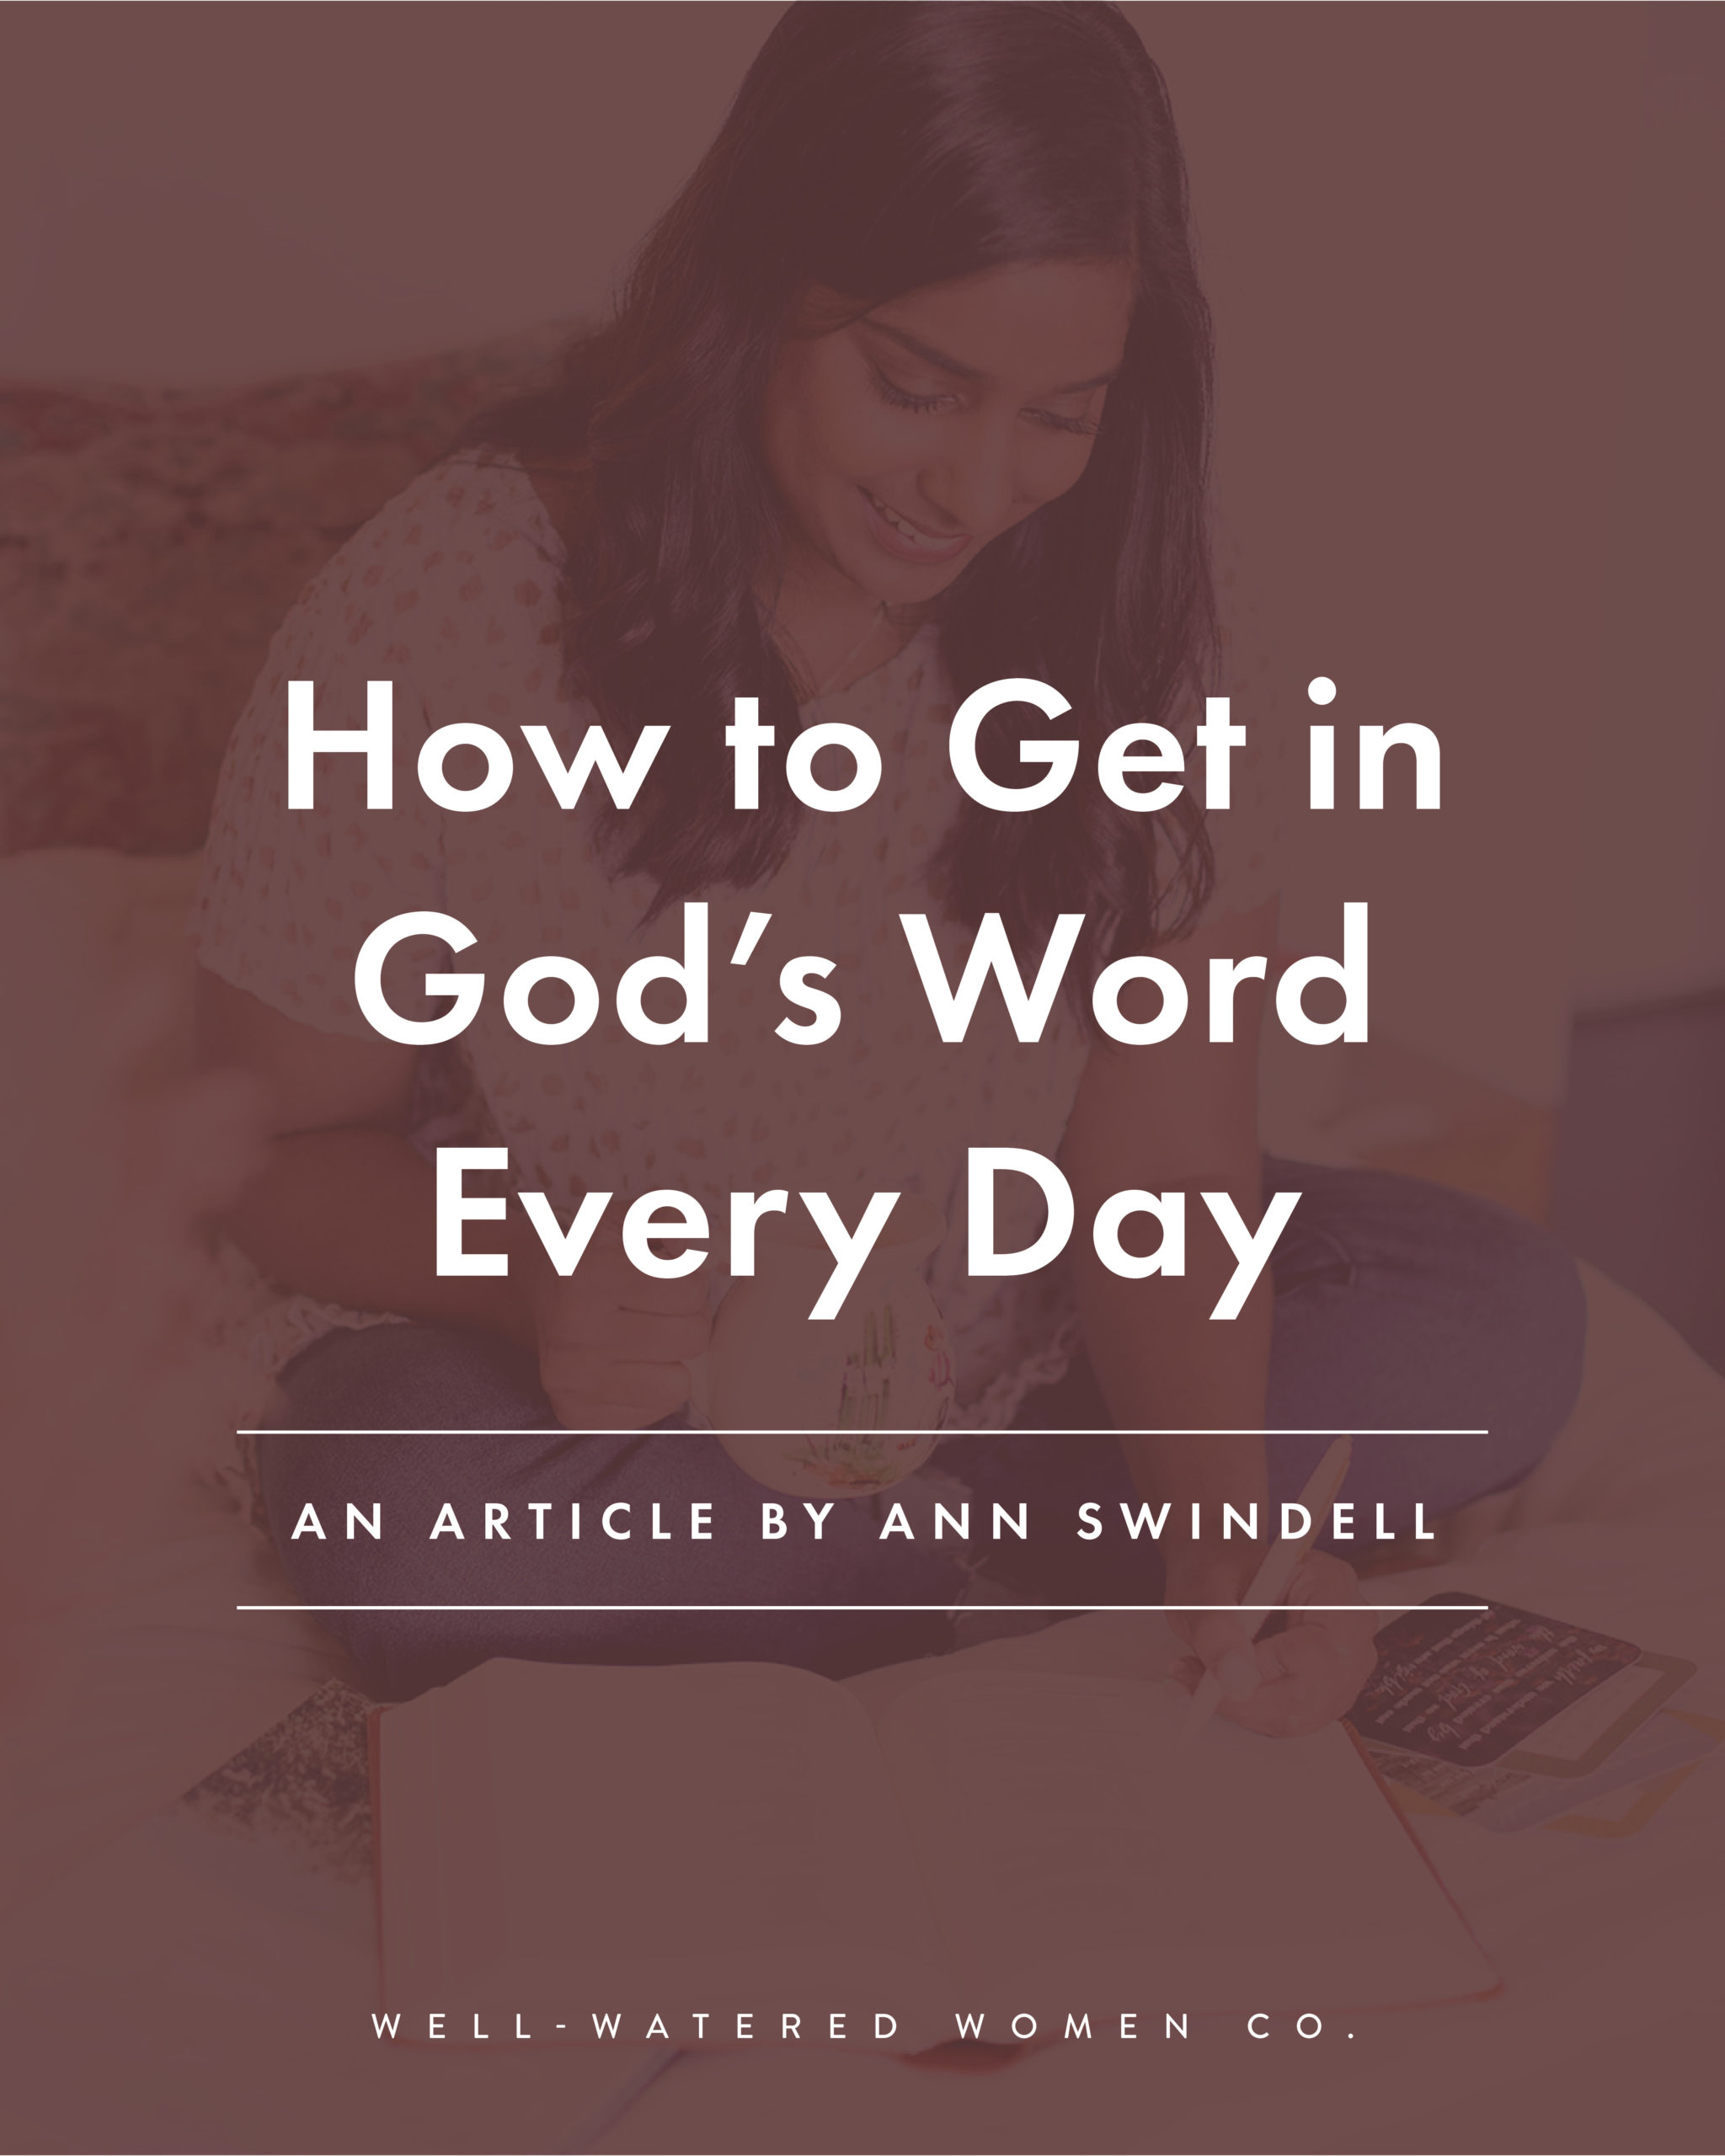 How to Get in God's Word Every Day - an article from Well-Watered Women